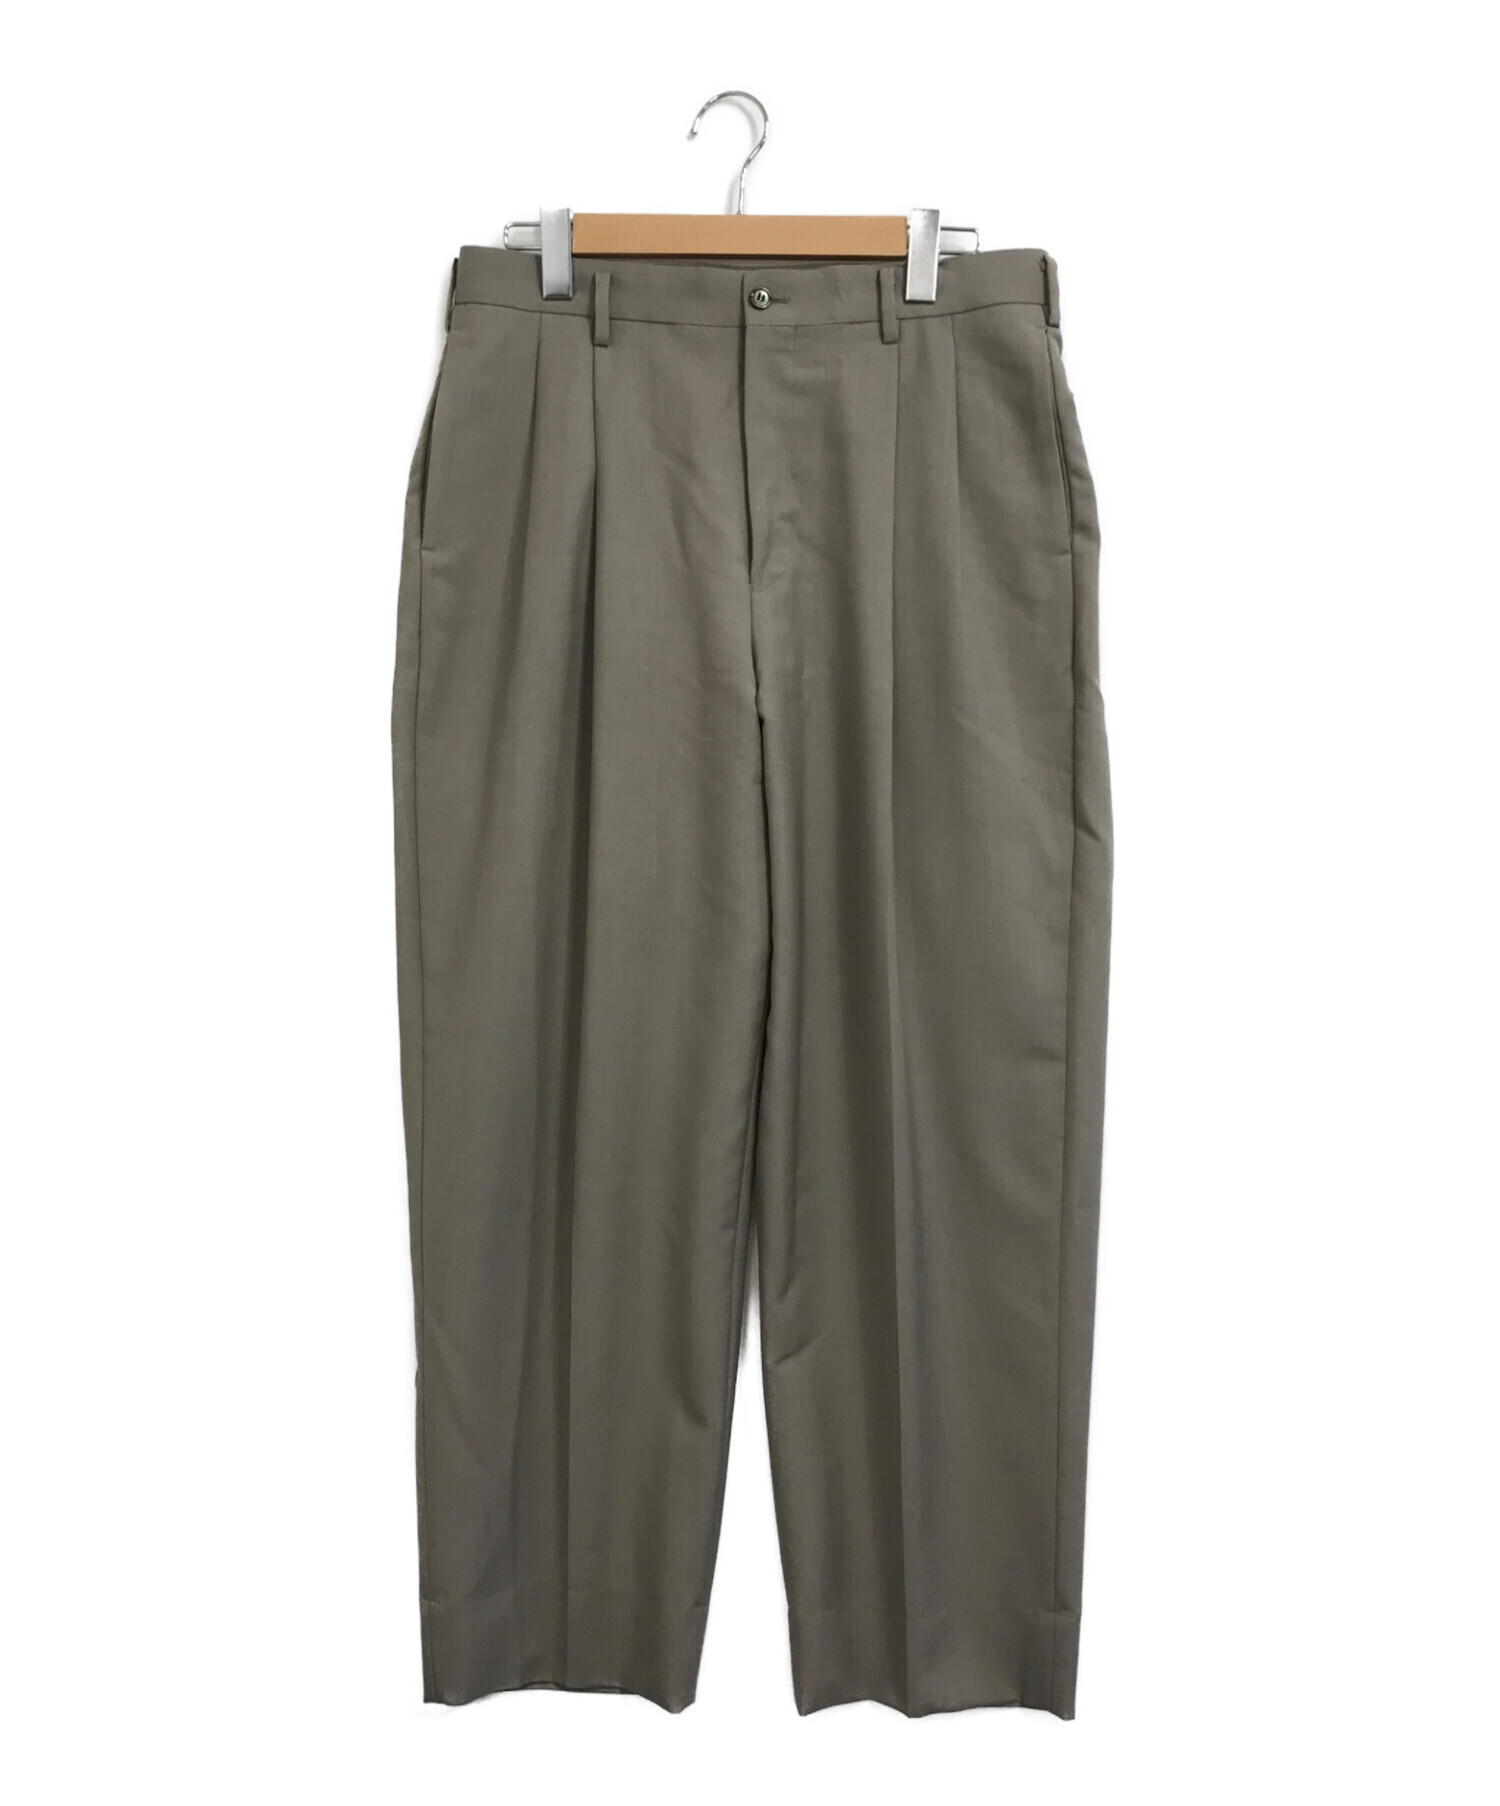 marka 2TUCK COCOON FIT - w.m tropical - - セットアップ